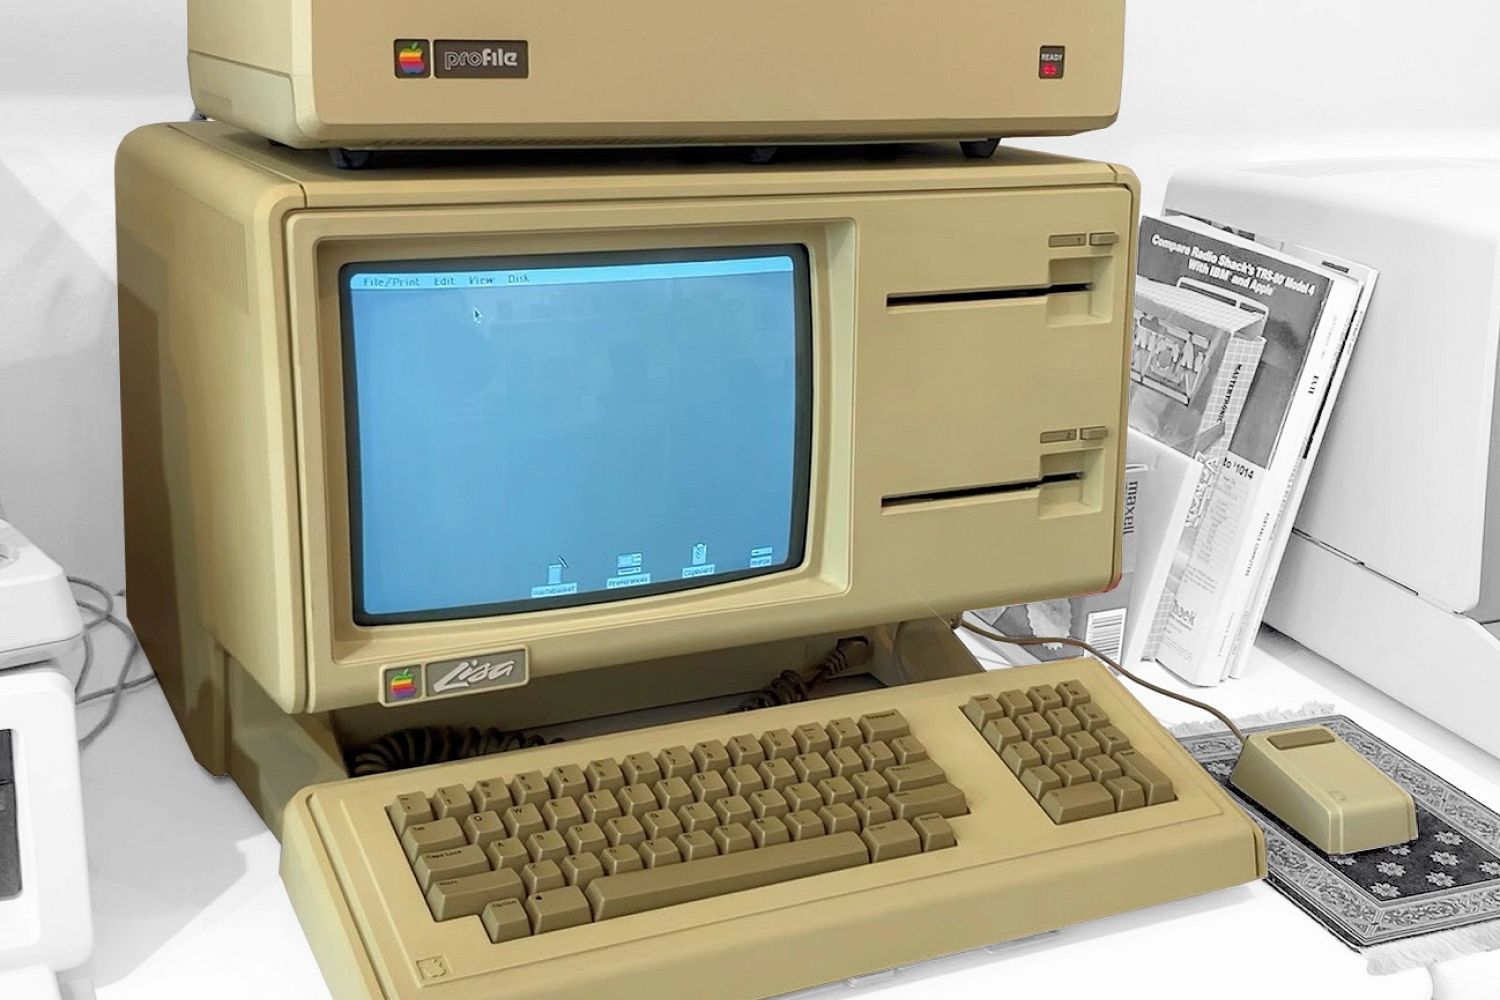 On this day 41 years ago, Apple released the Lisa computer for $10,000